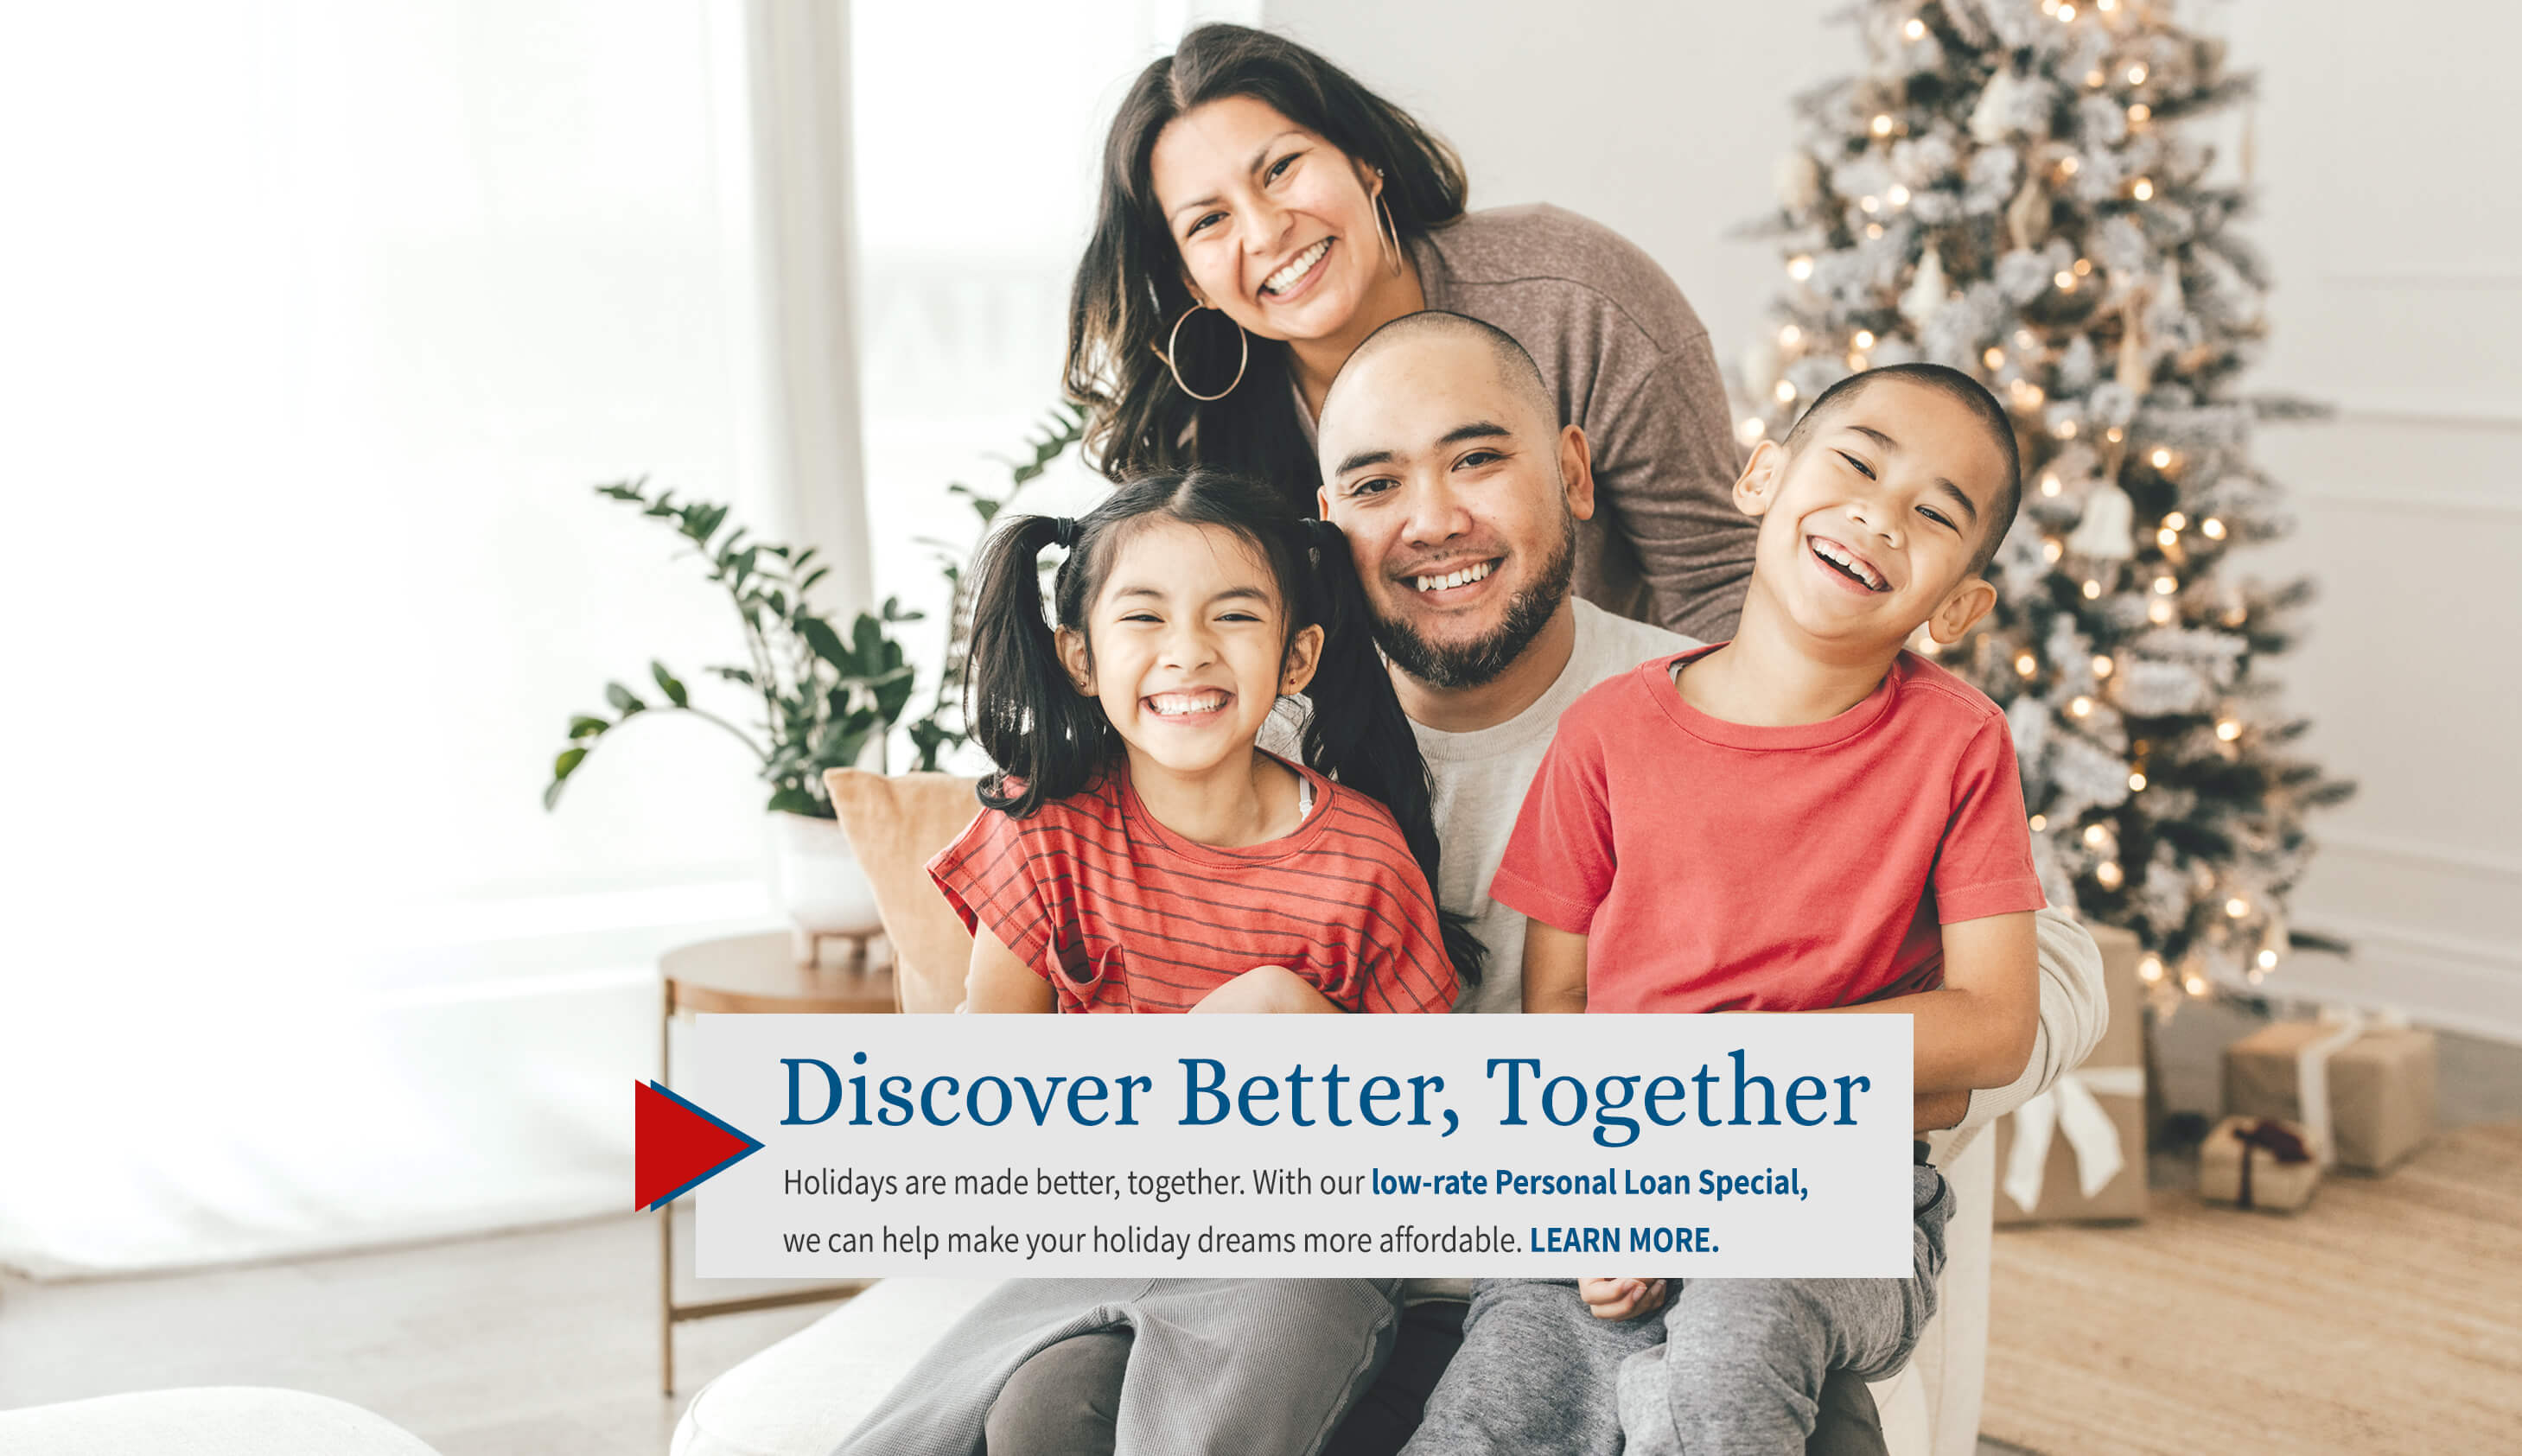 Discover better, together Holidays are made better, together. with our low-rate Personal Loan Special, we can help make your holiday dreams more affordable. learn more